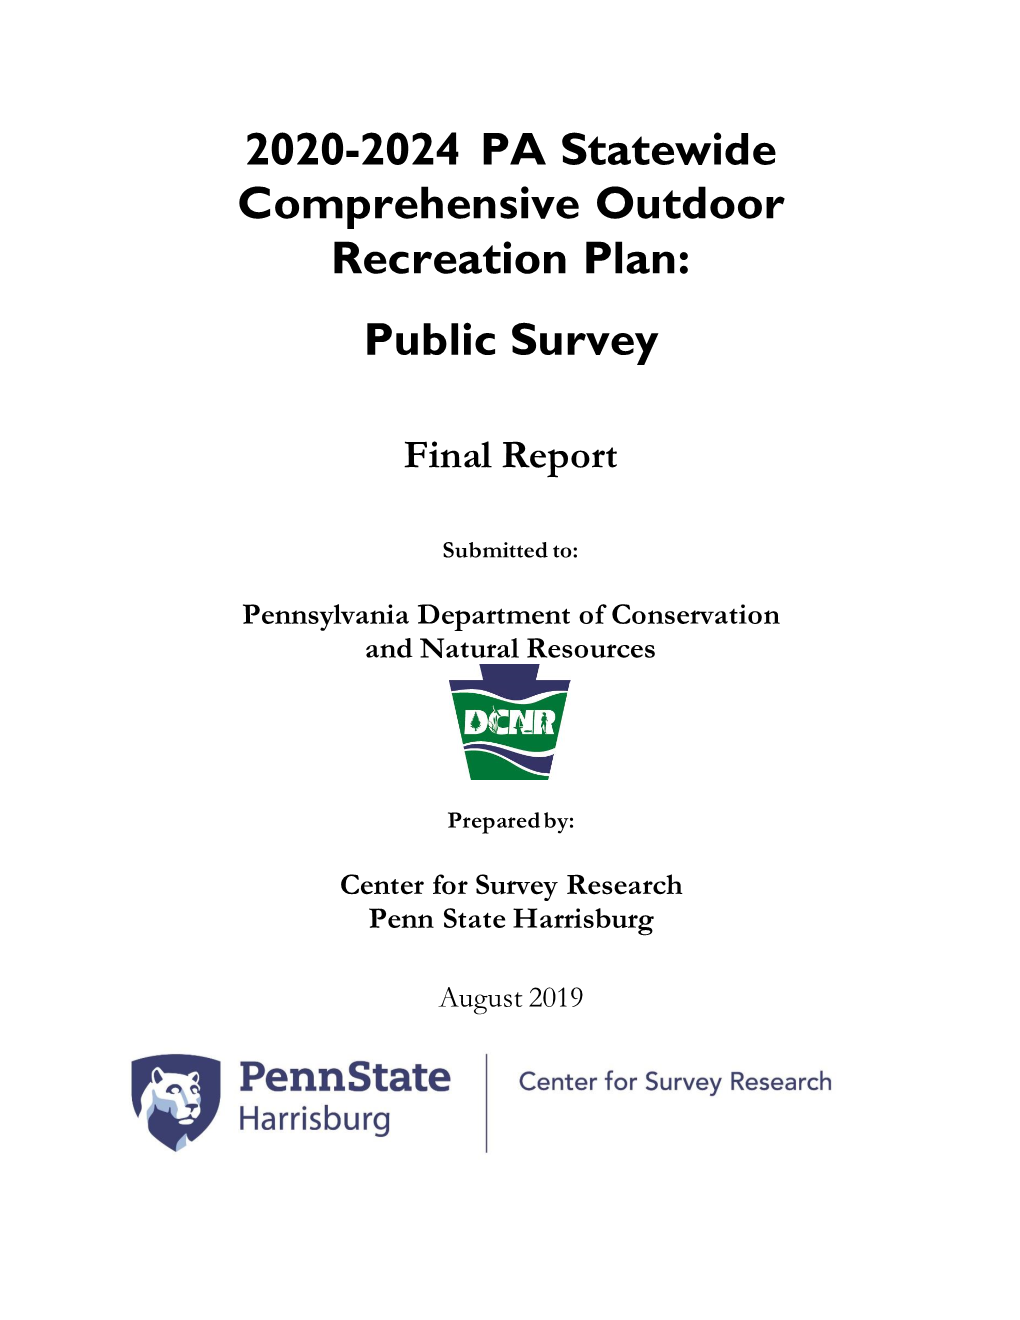 2020-2024 PA Statewide Comprehensive Outdoor Recreation Plan: Public Survey